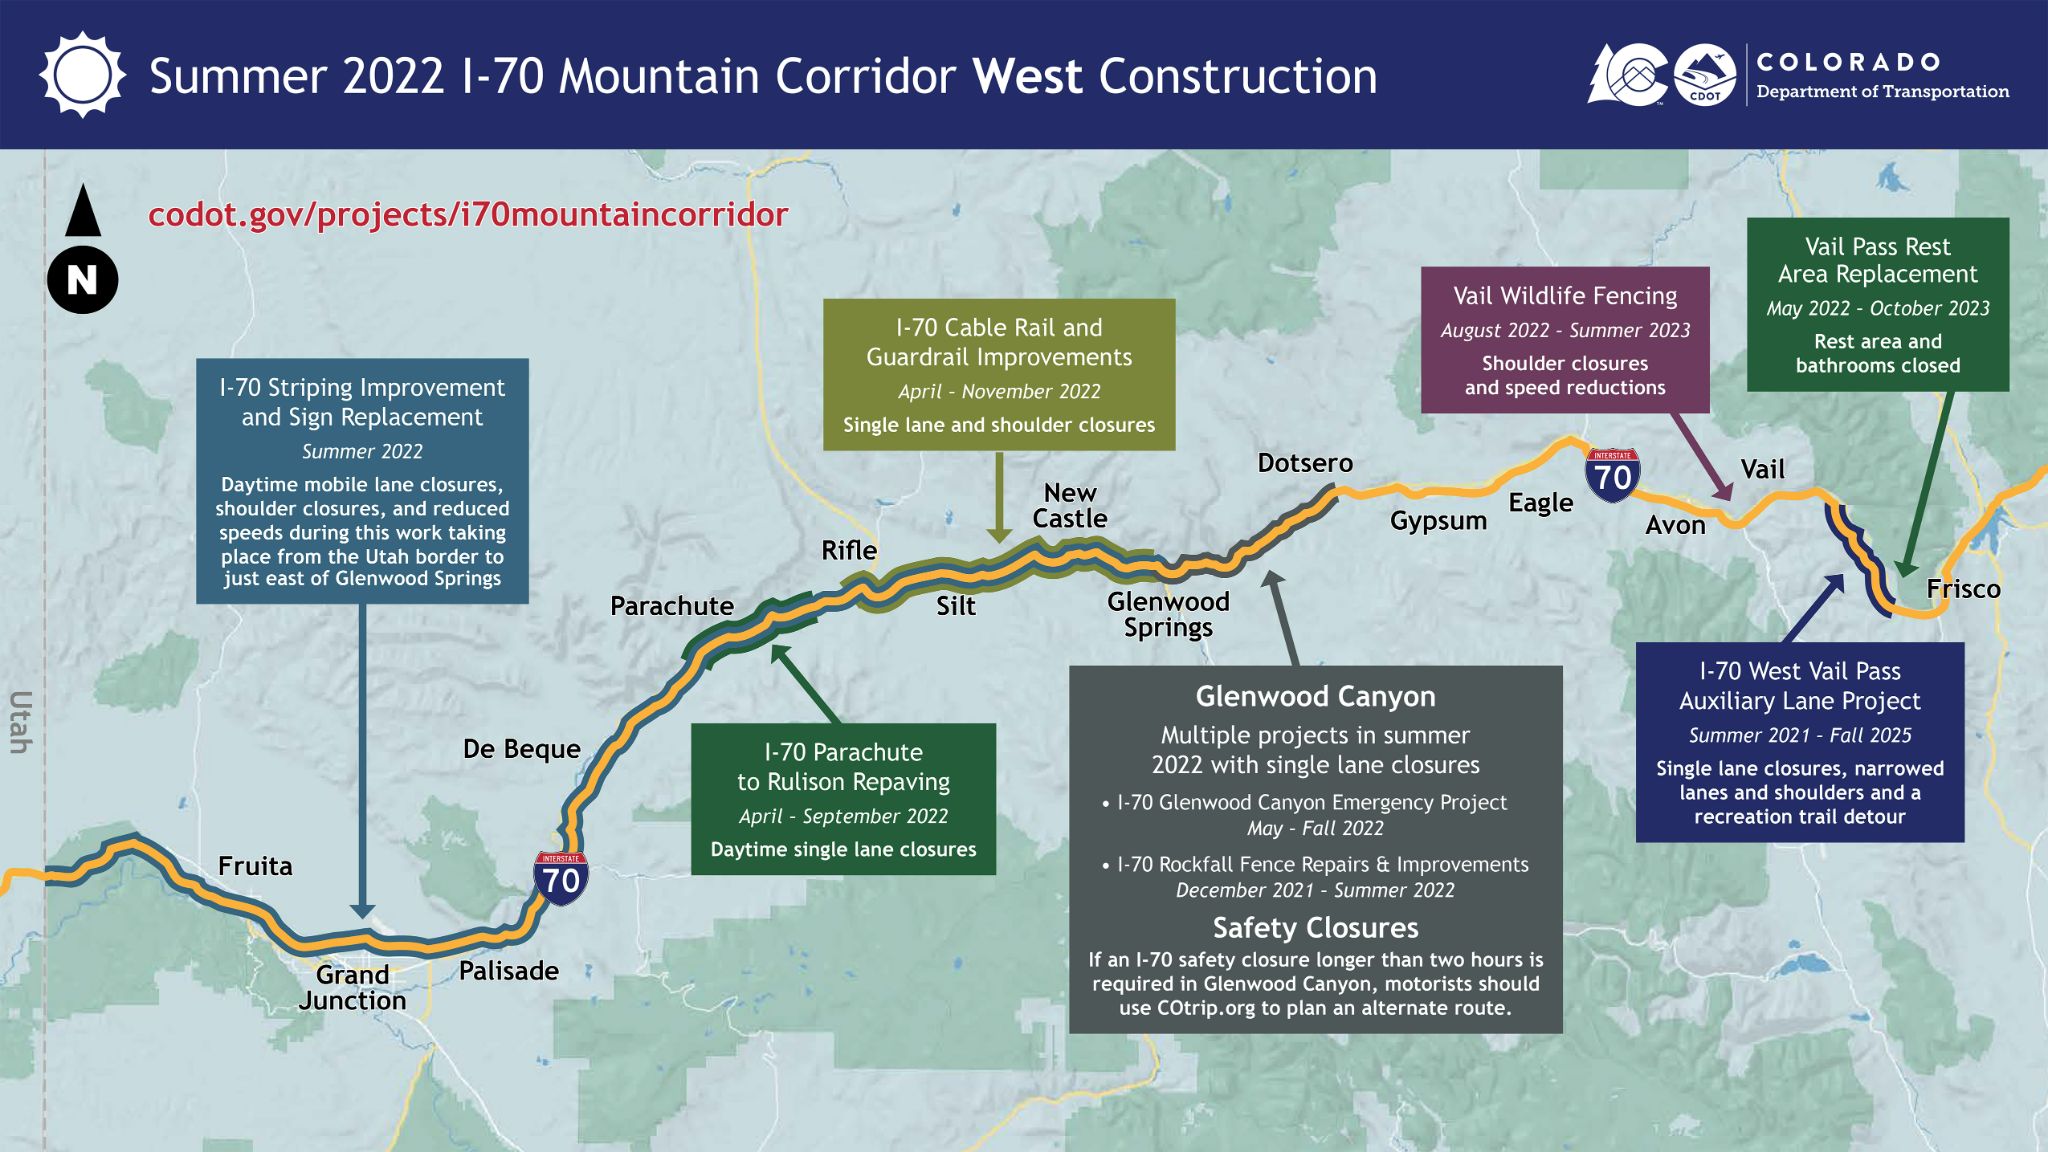 I-70-Project-Map-WEST-2022.jpg detail image